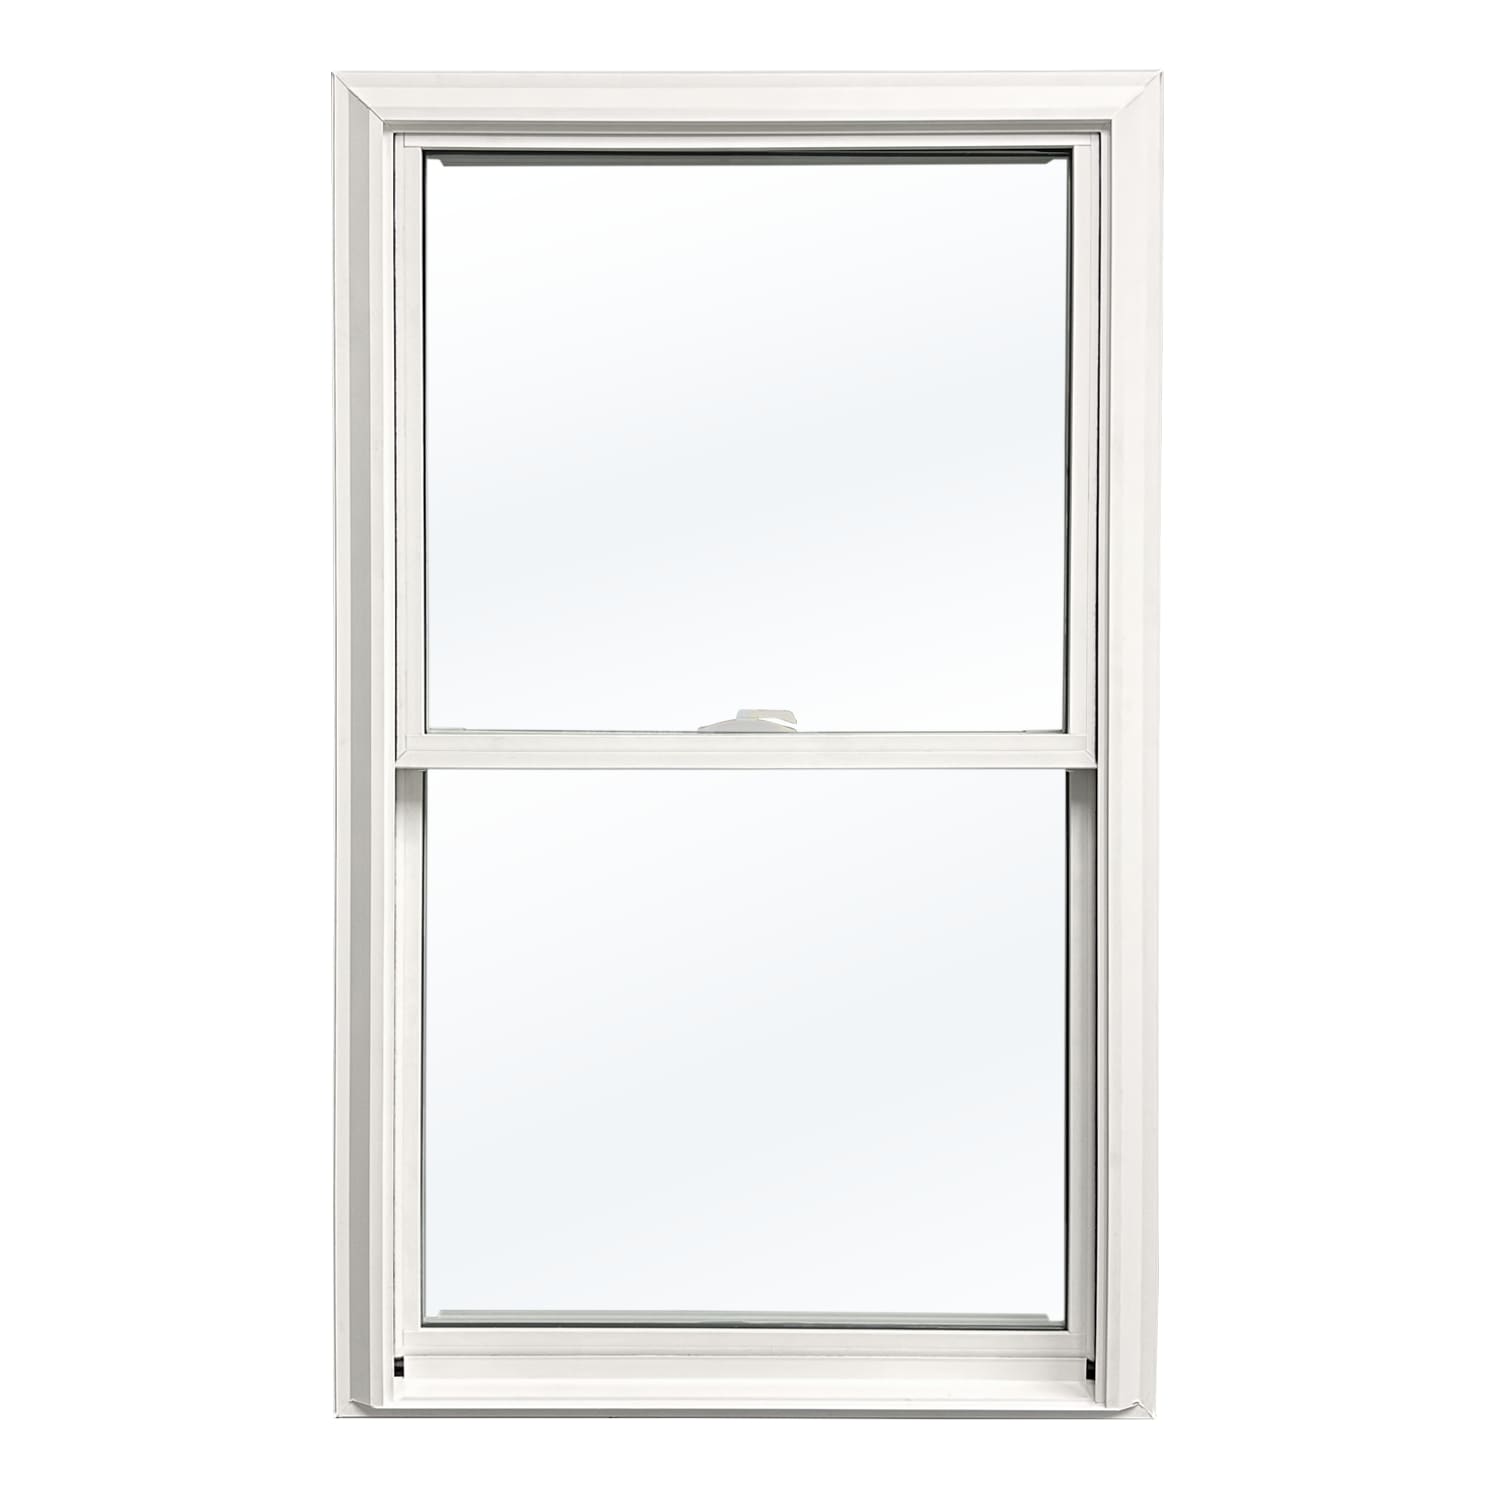 United Window & Door PRO Series Replacement 27-3/4-in x 44-1/2-in x  3-1/4-in Jamb White Vinyl Low-e Argon Double Hung Window Half Screen  Included in the Double Hung Windows department at